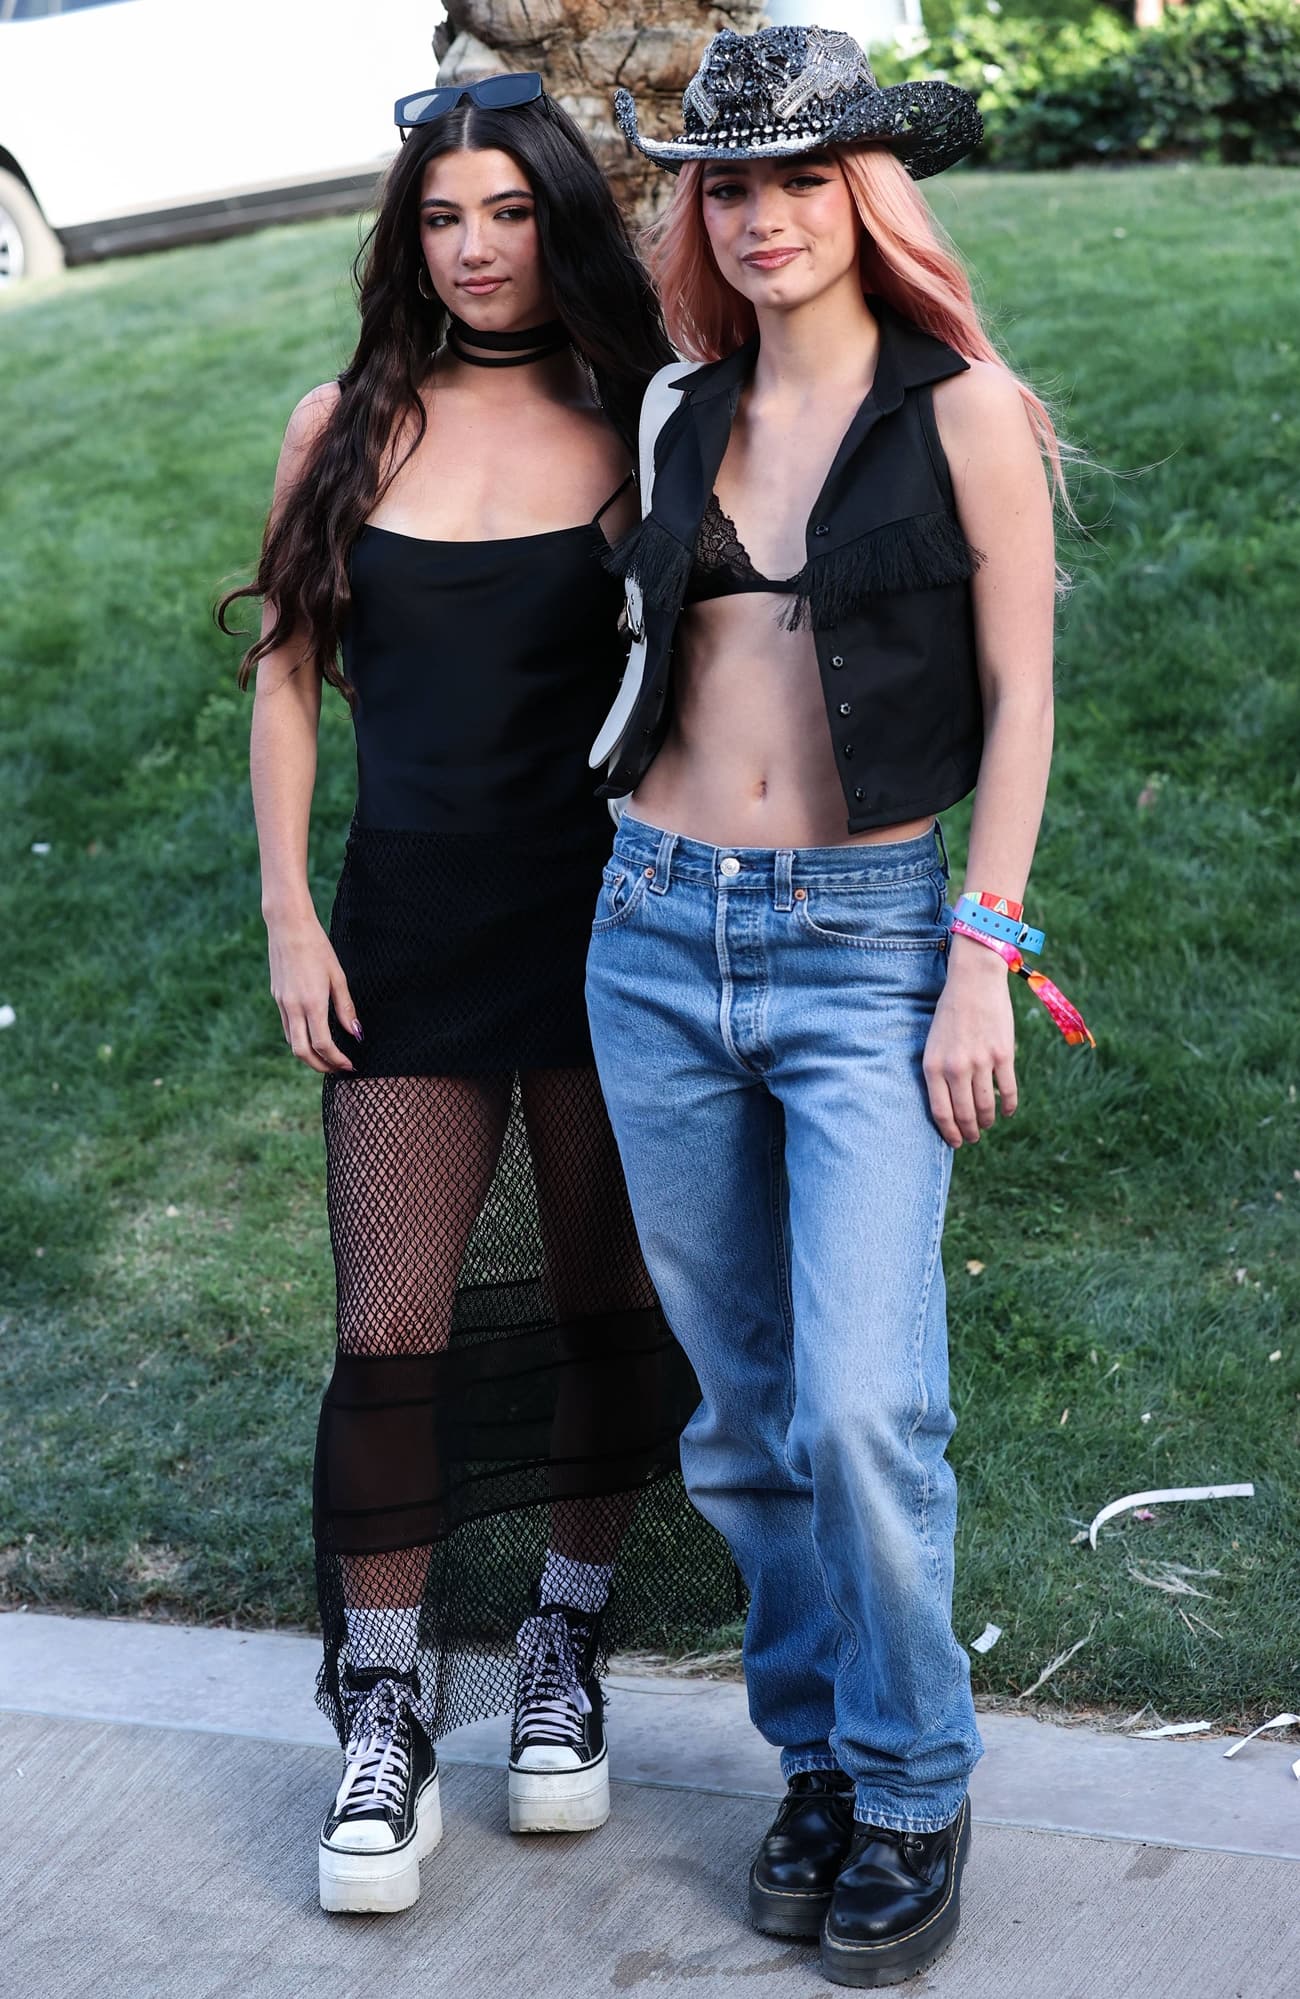 Dixie D'Amelio with her sister Charli D'Amelio at the Revolve Festival outside Coachella